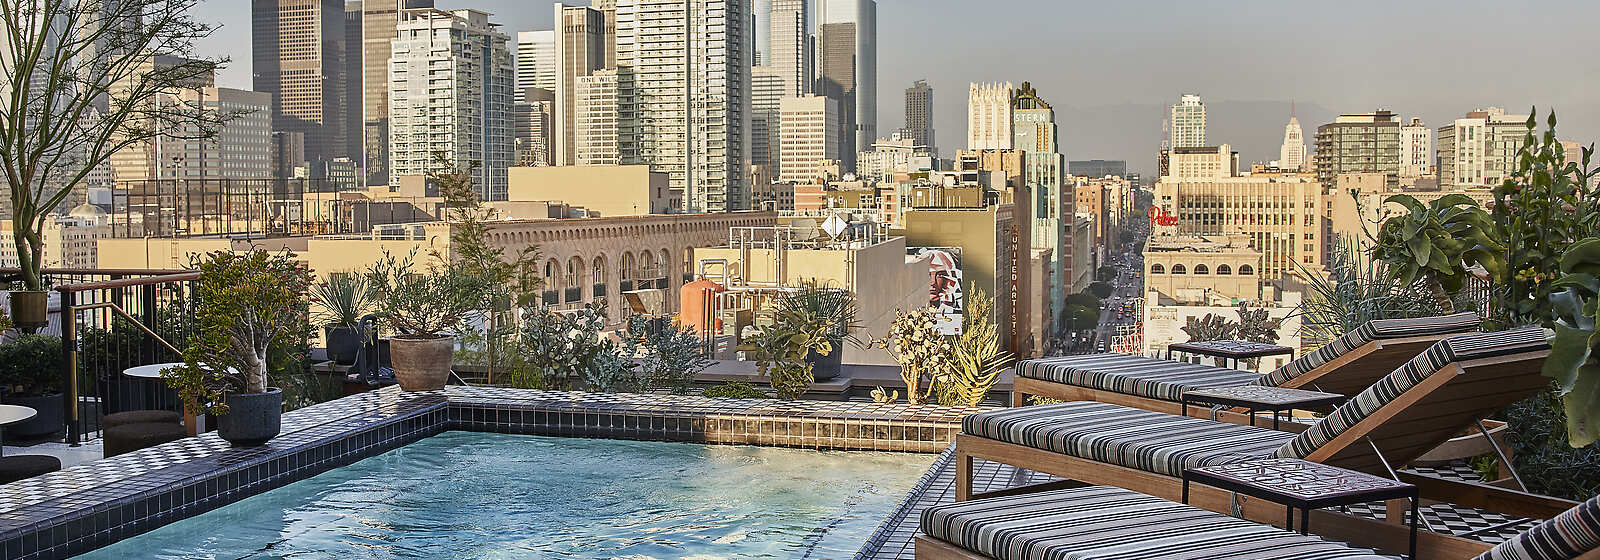 Rooftop Pool and skyline view of Downtown L.A. 